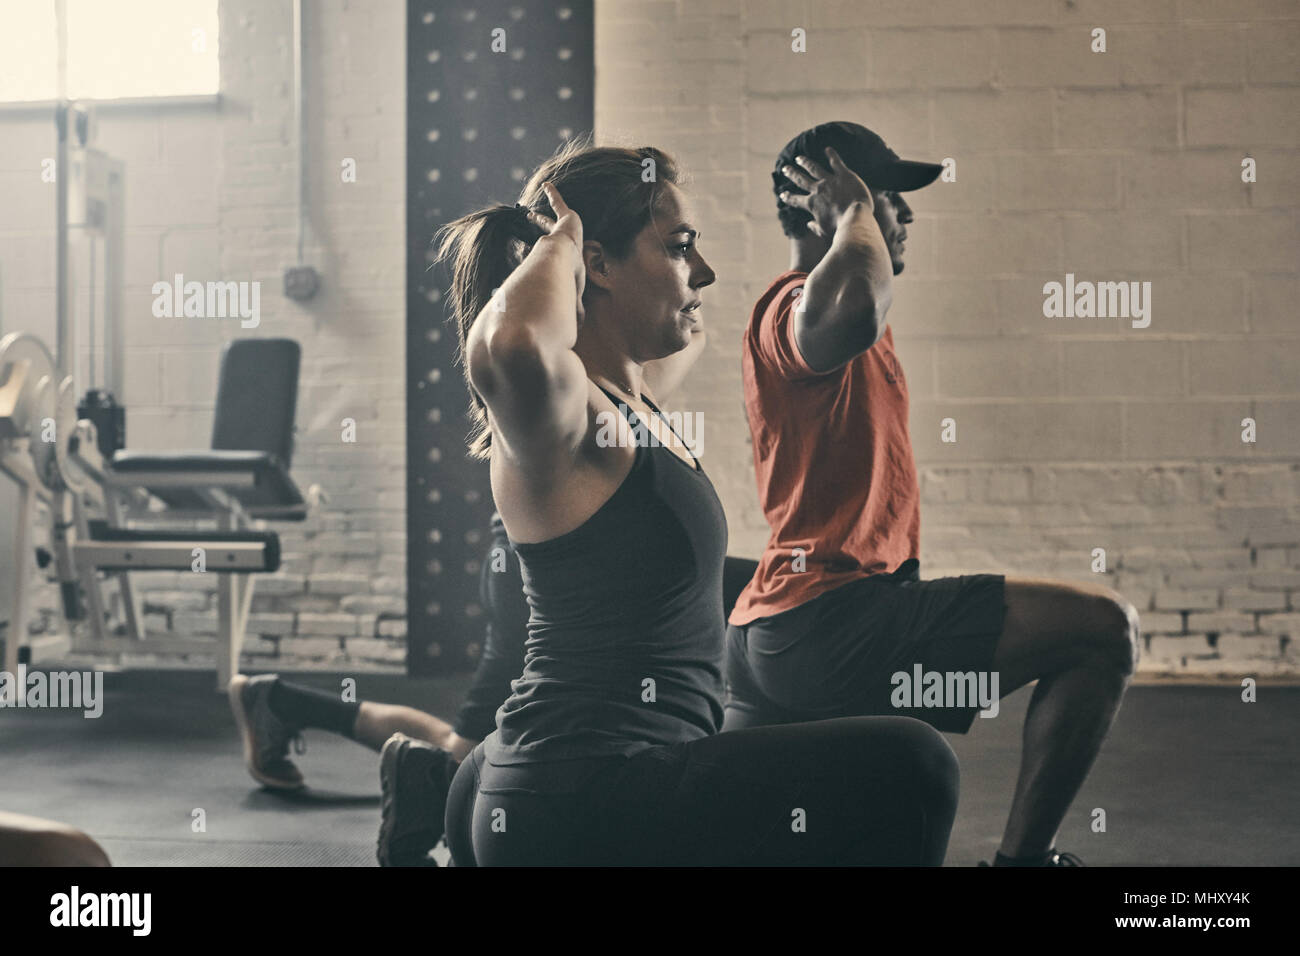 People exercising in gym, hands behind head lunging Stock Photo